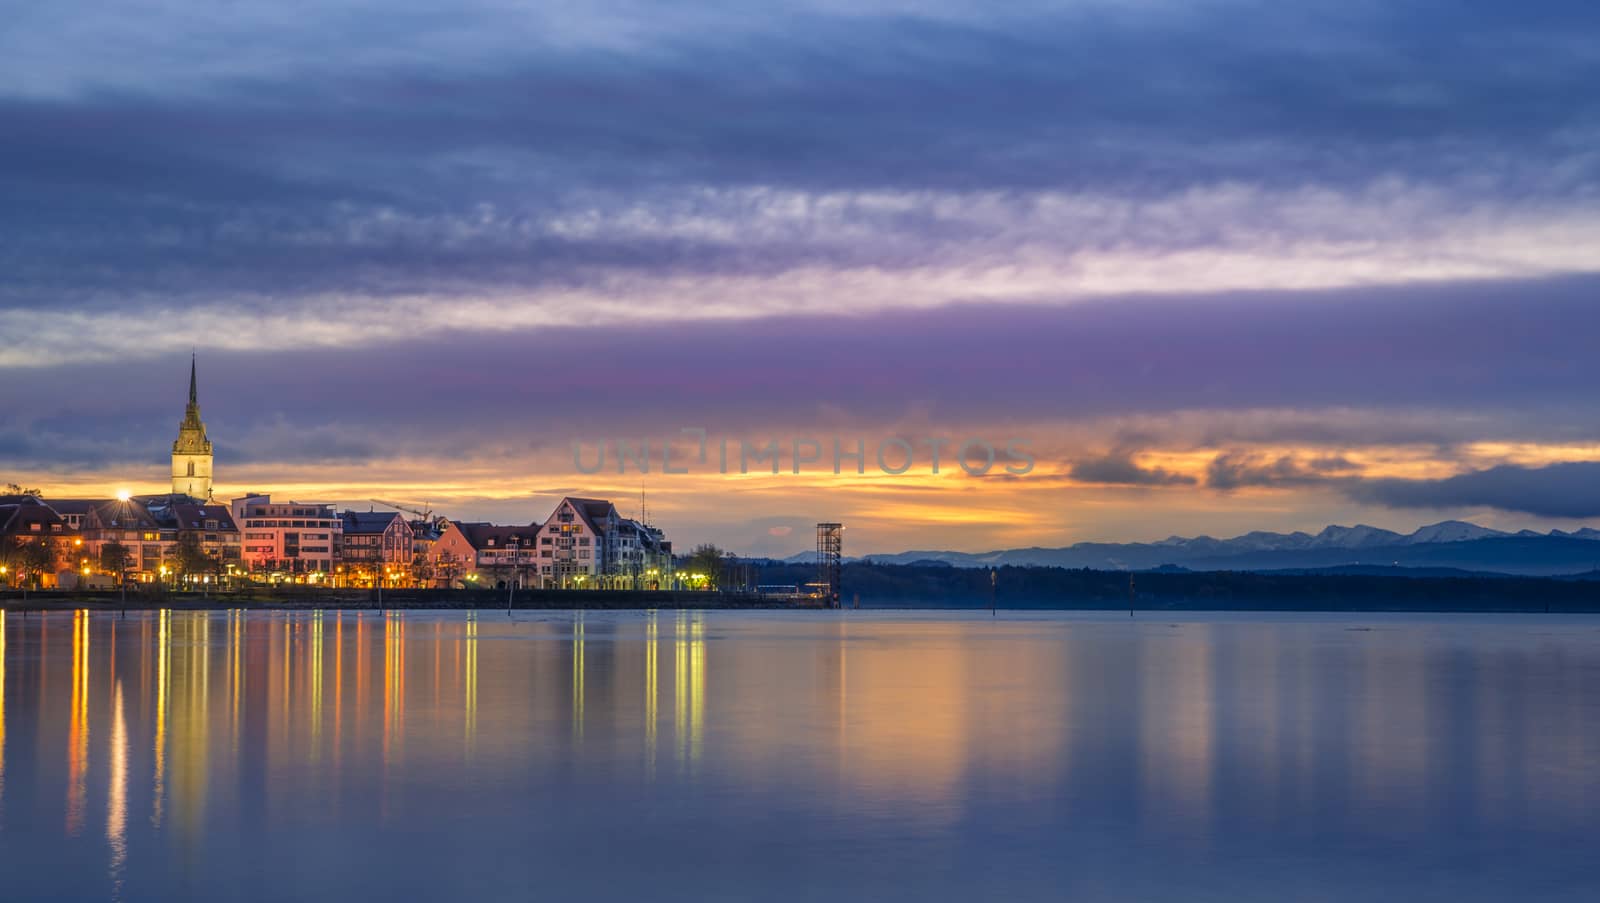 Multi-colored landscape with the Friedrichshafen town, Germany and the Bodensee lake at dawn.